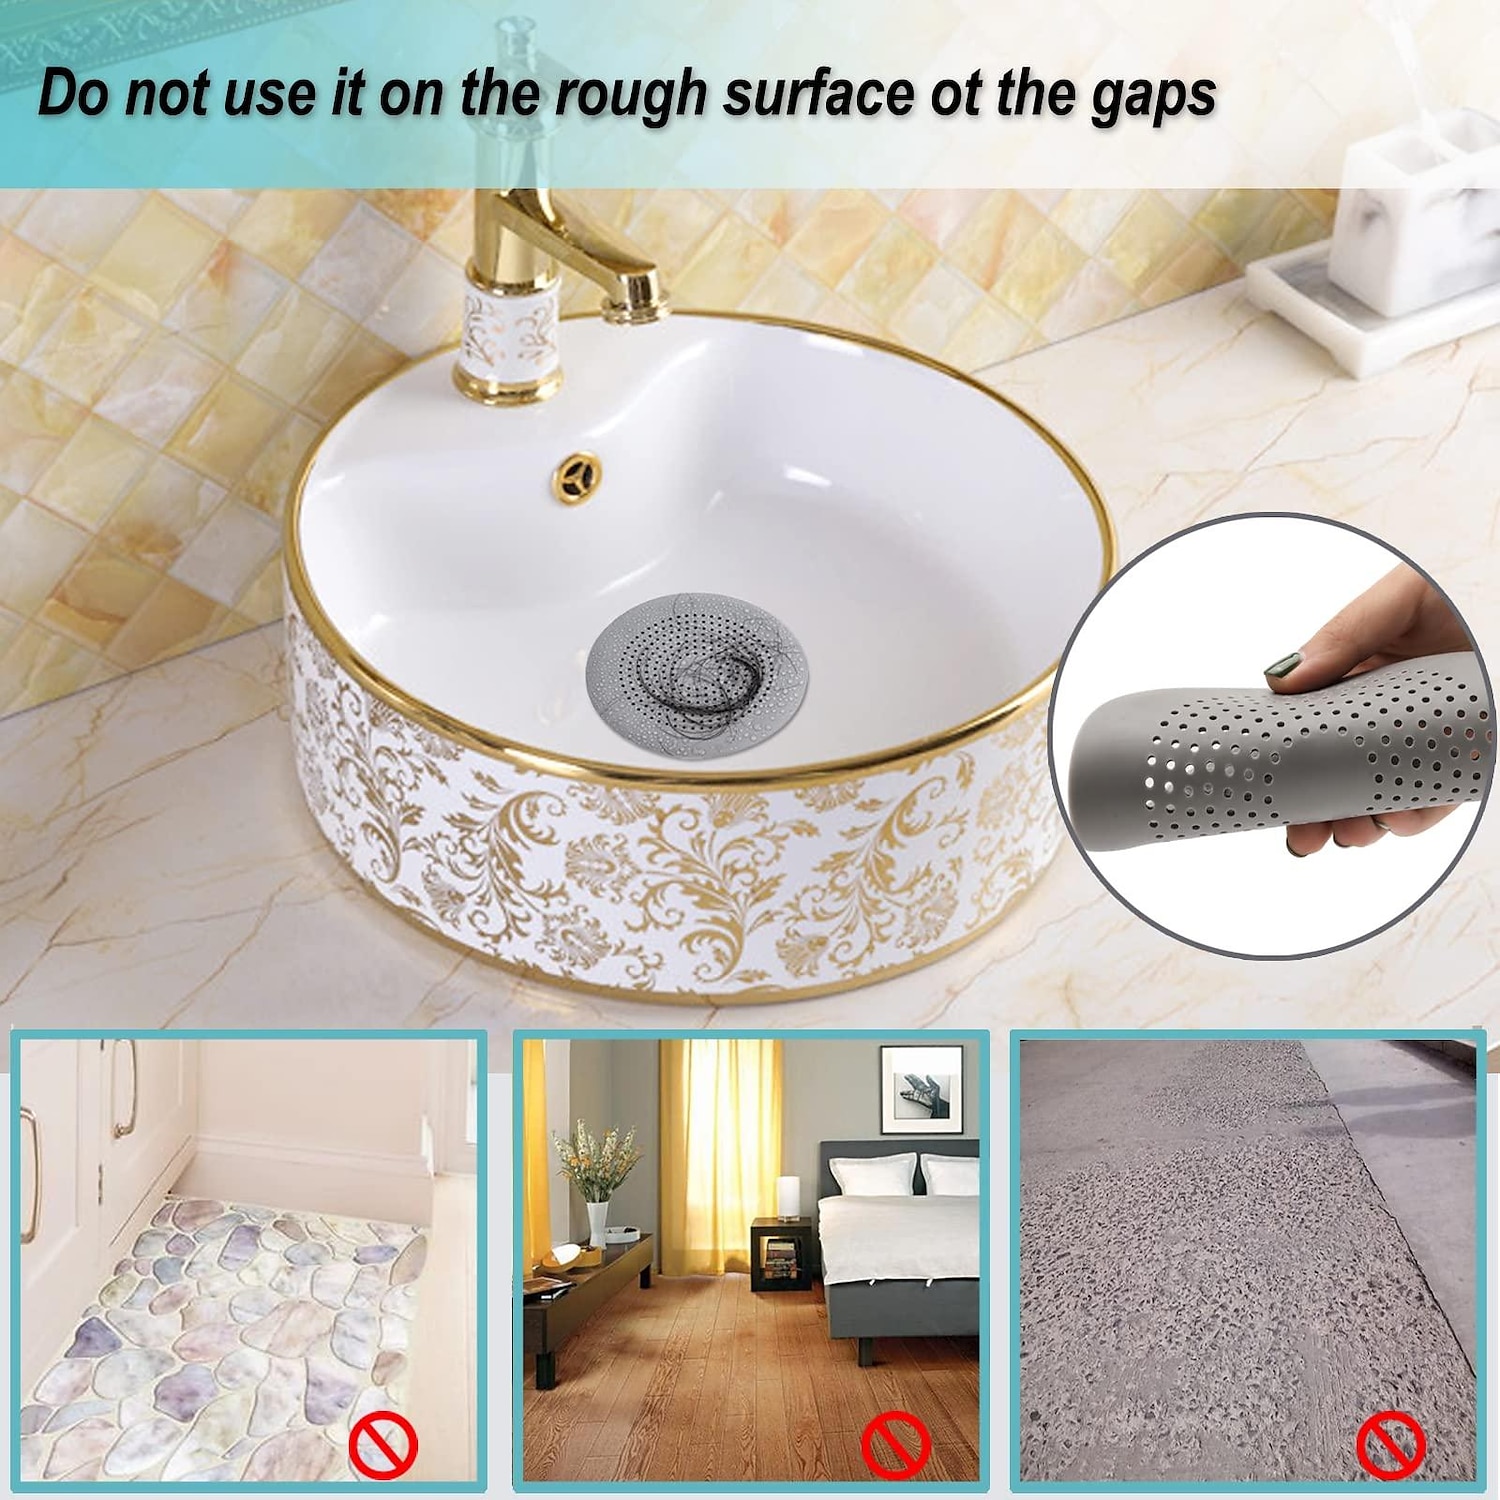 1pc Hair Drain Catcher,Square Drain Cover for Shower Silicone Sink Drain  Strainer Hair Stopper with Suction Cup,Easy to Install Suit for Bathroom, Bathtub,Kitchen (White)